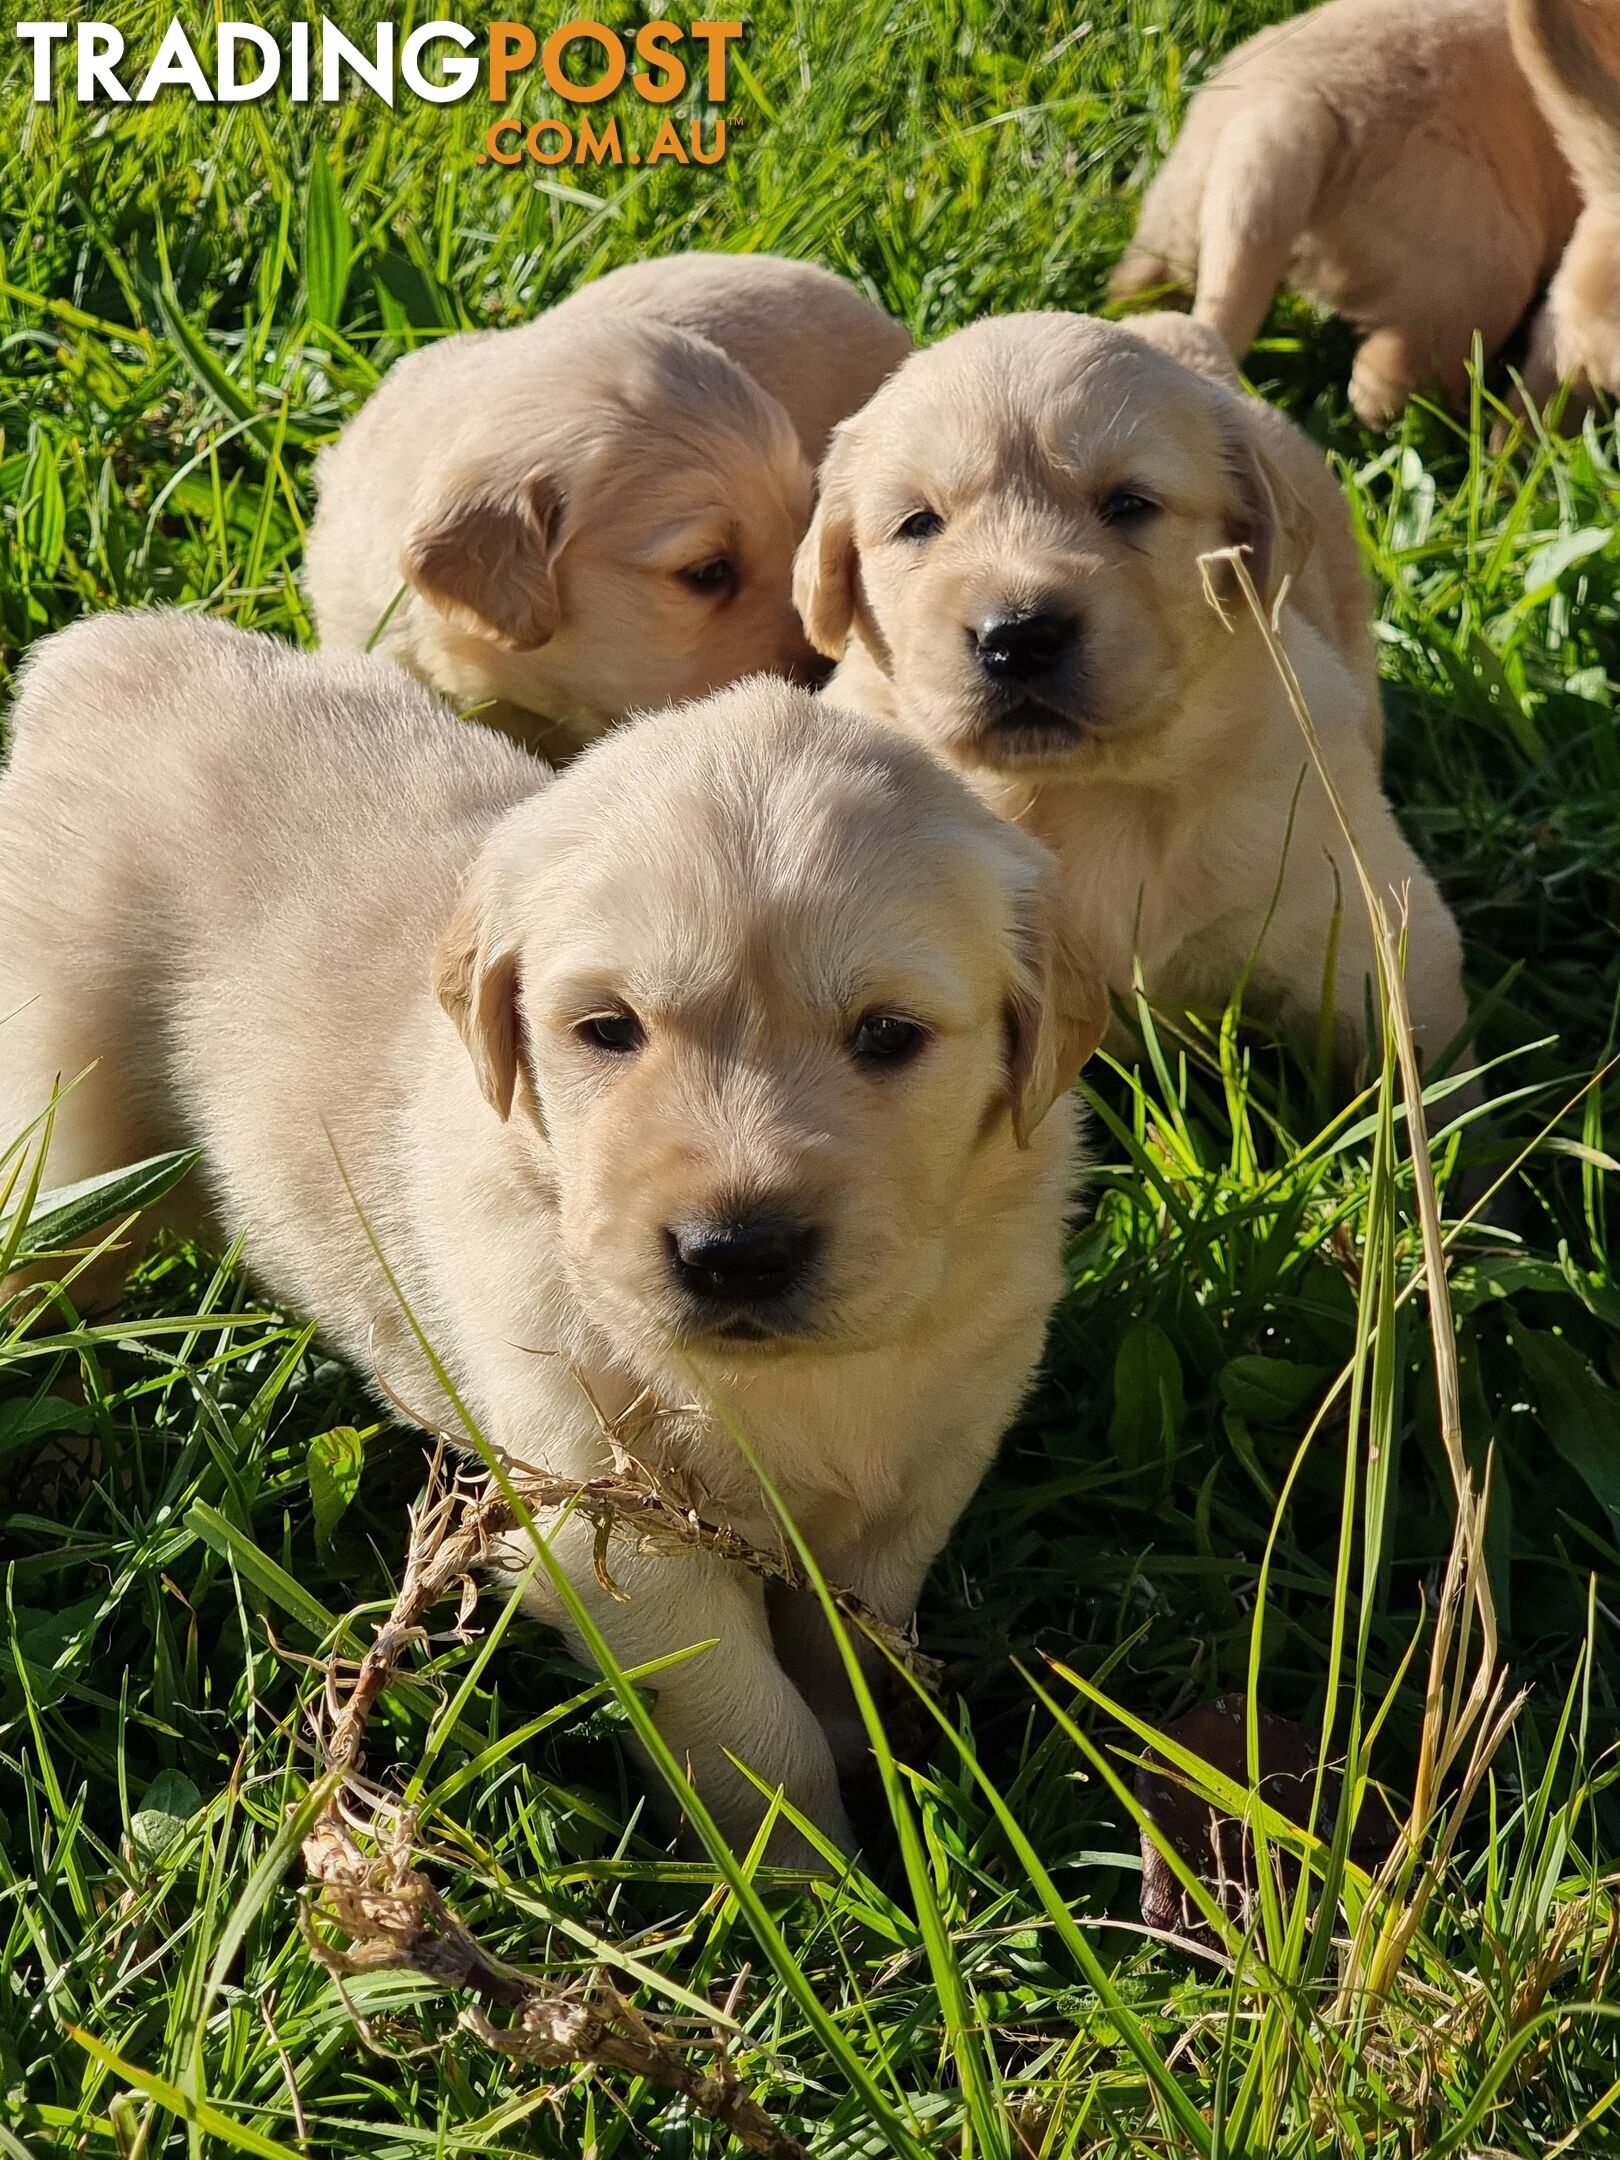 Pure Bred Golden Retriever Puppies, Very strong and big